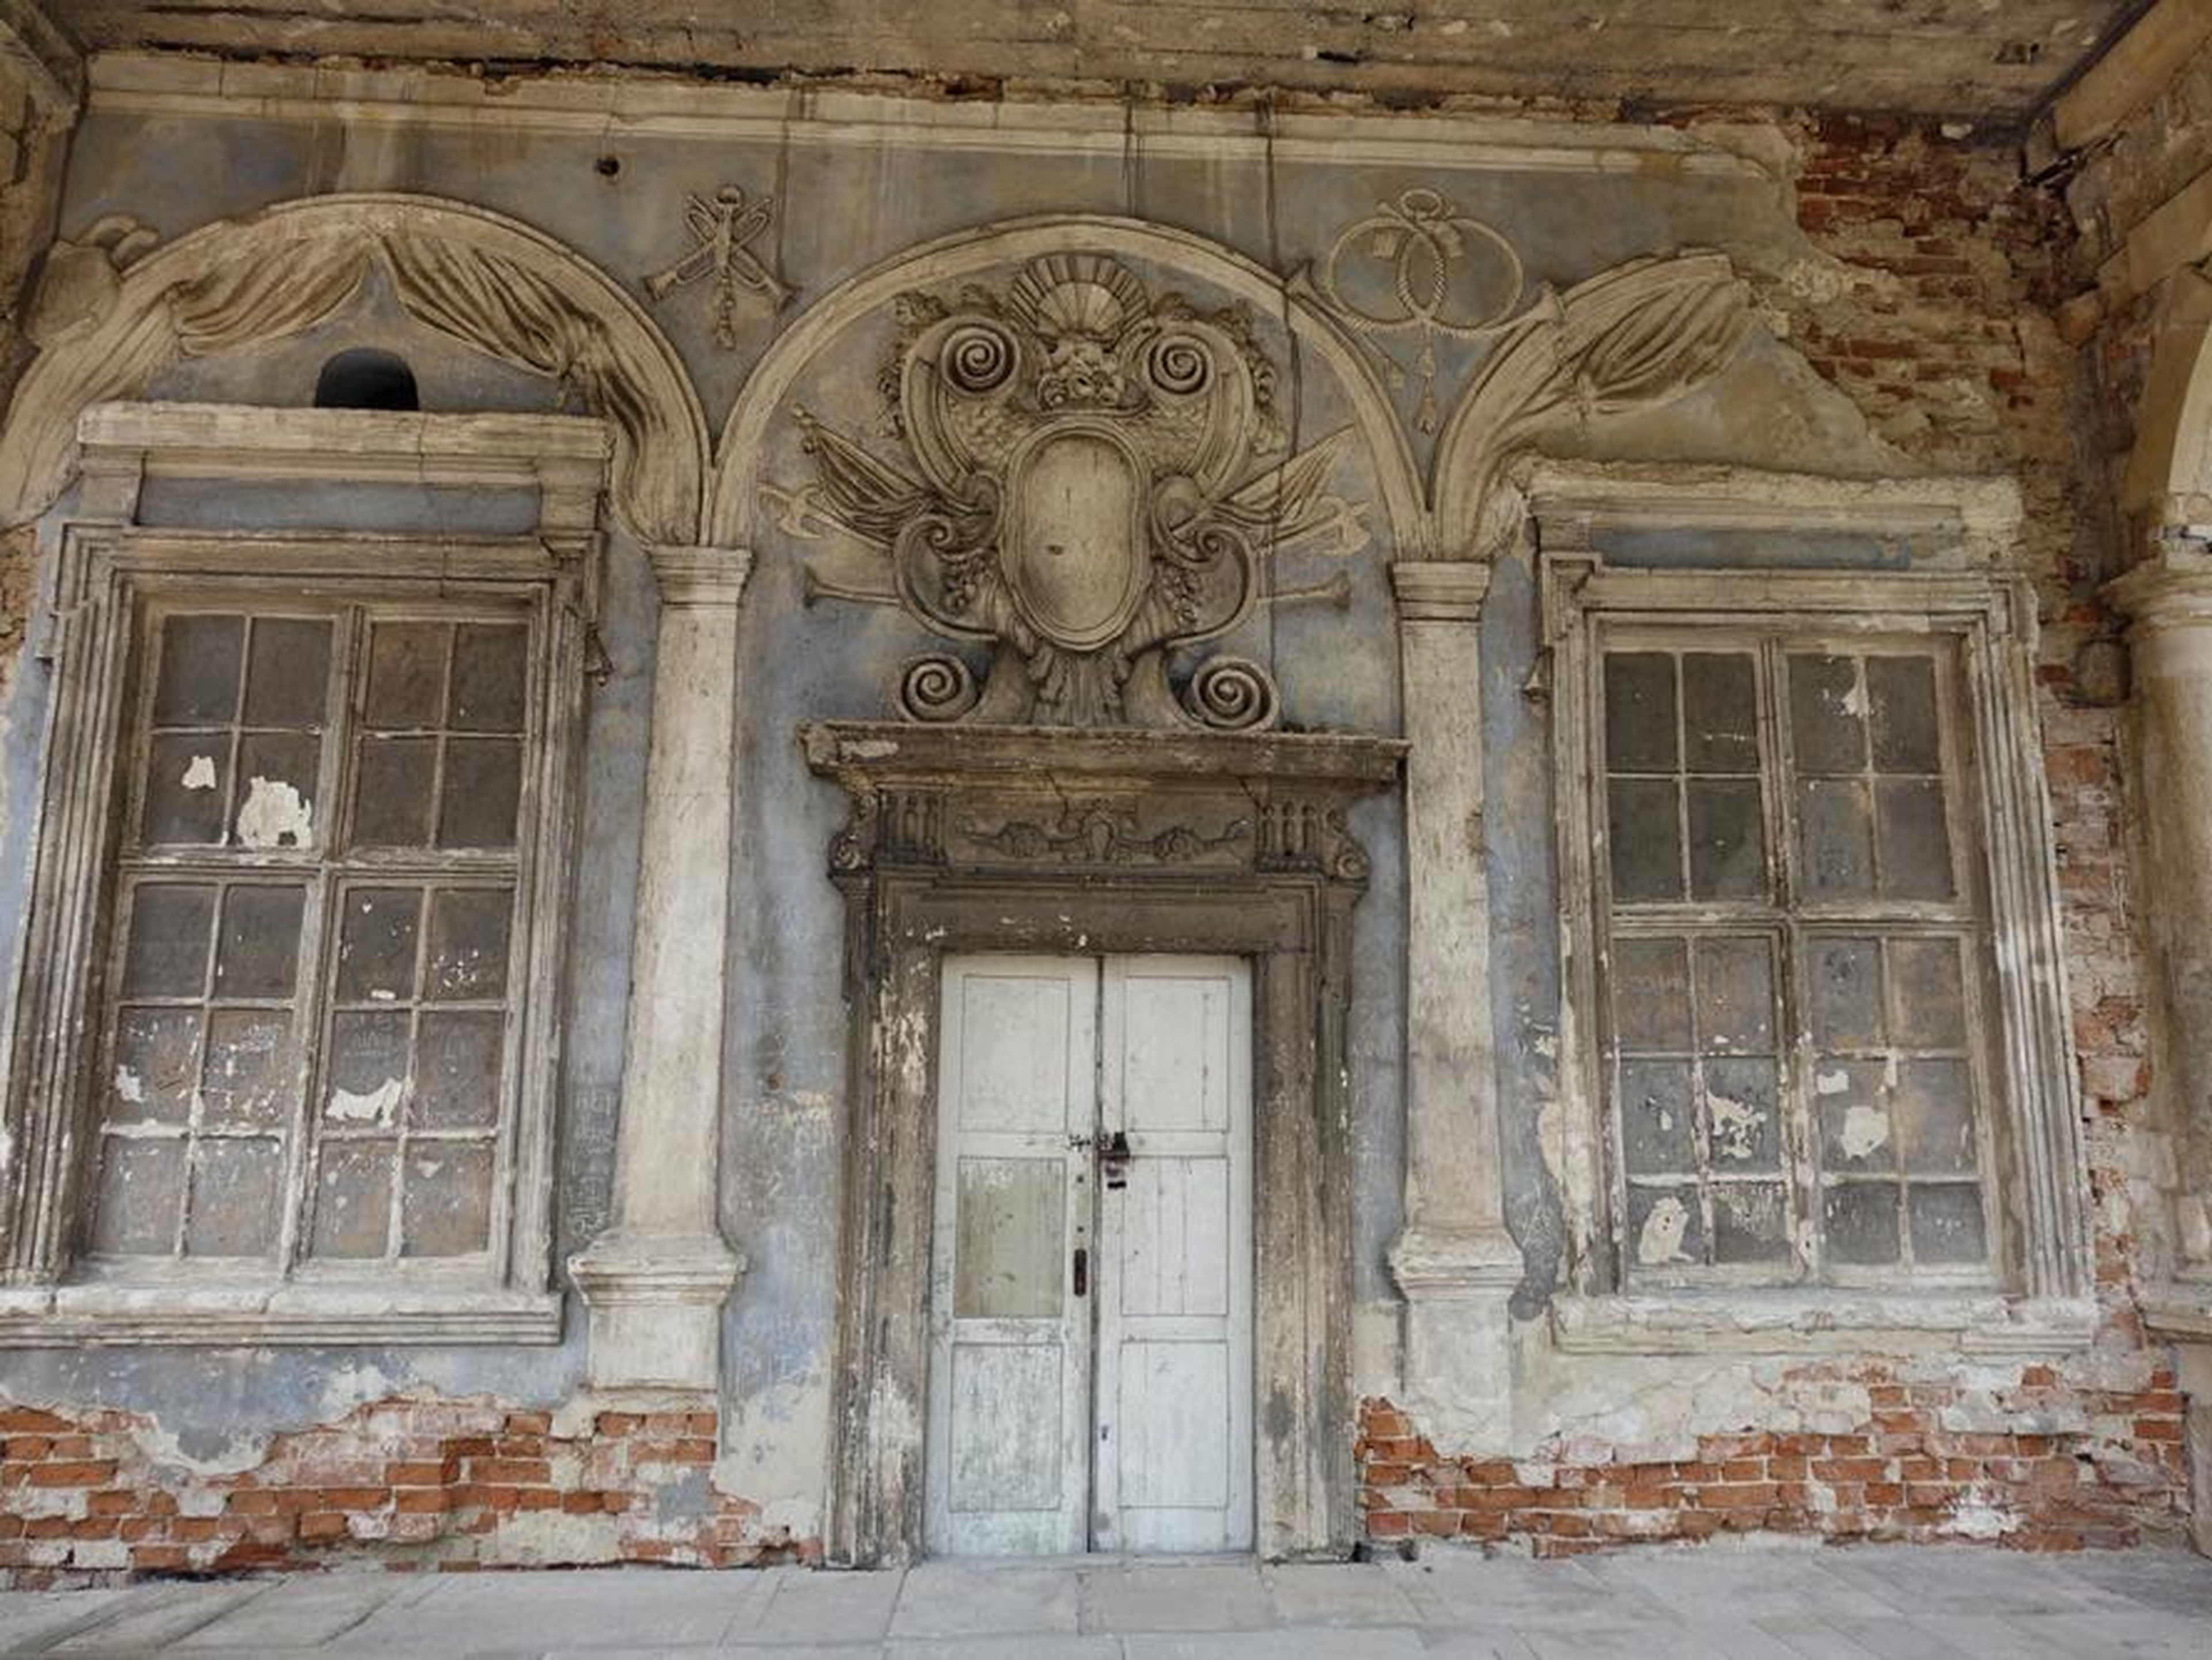 Pidhirtsi Castle has been damaged by fire and flooding over the years. The Lviv Art Gallery foundation aims to restore the mansion, but a lack of funds seems to have hampered progress. The foundation is calling for investors to